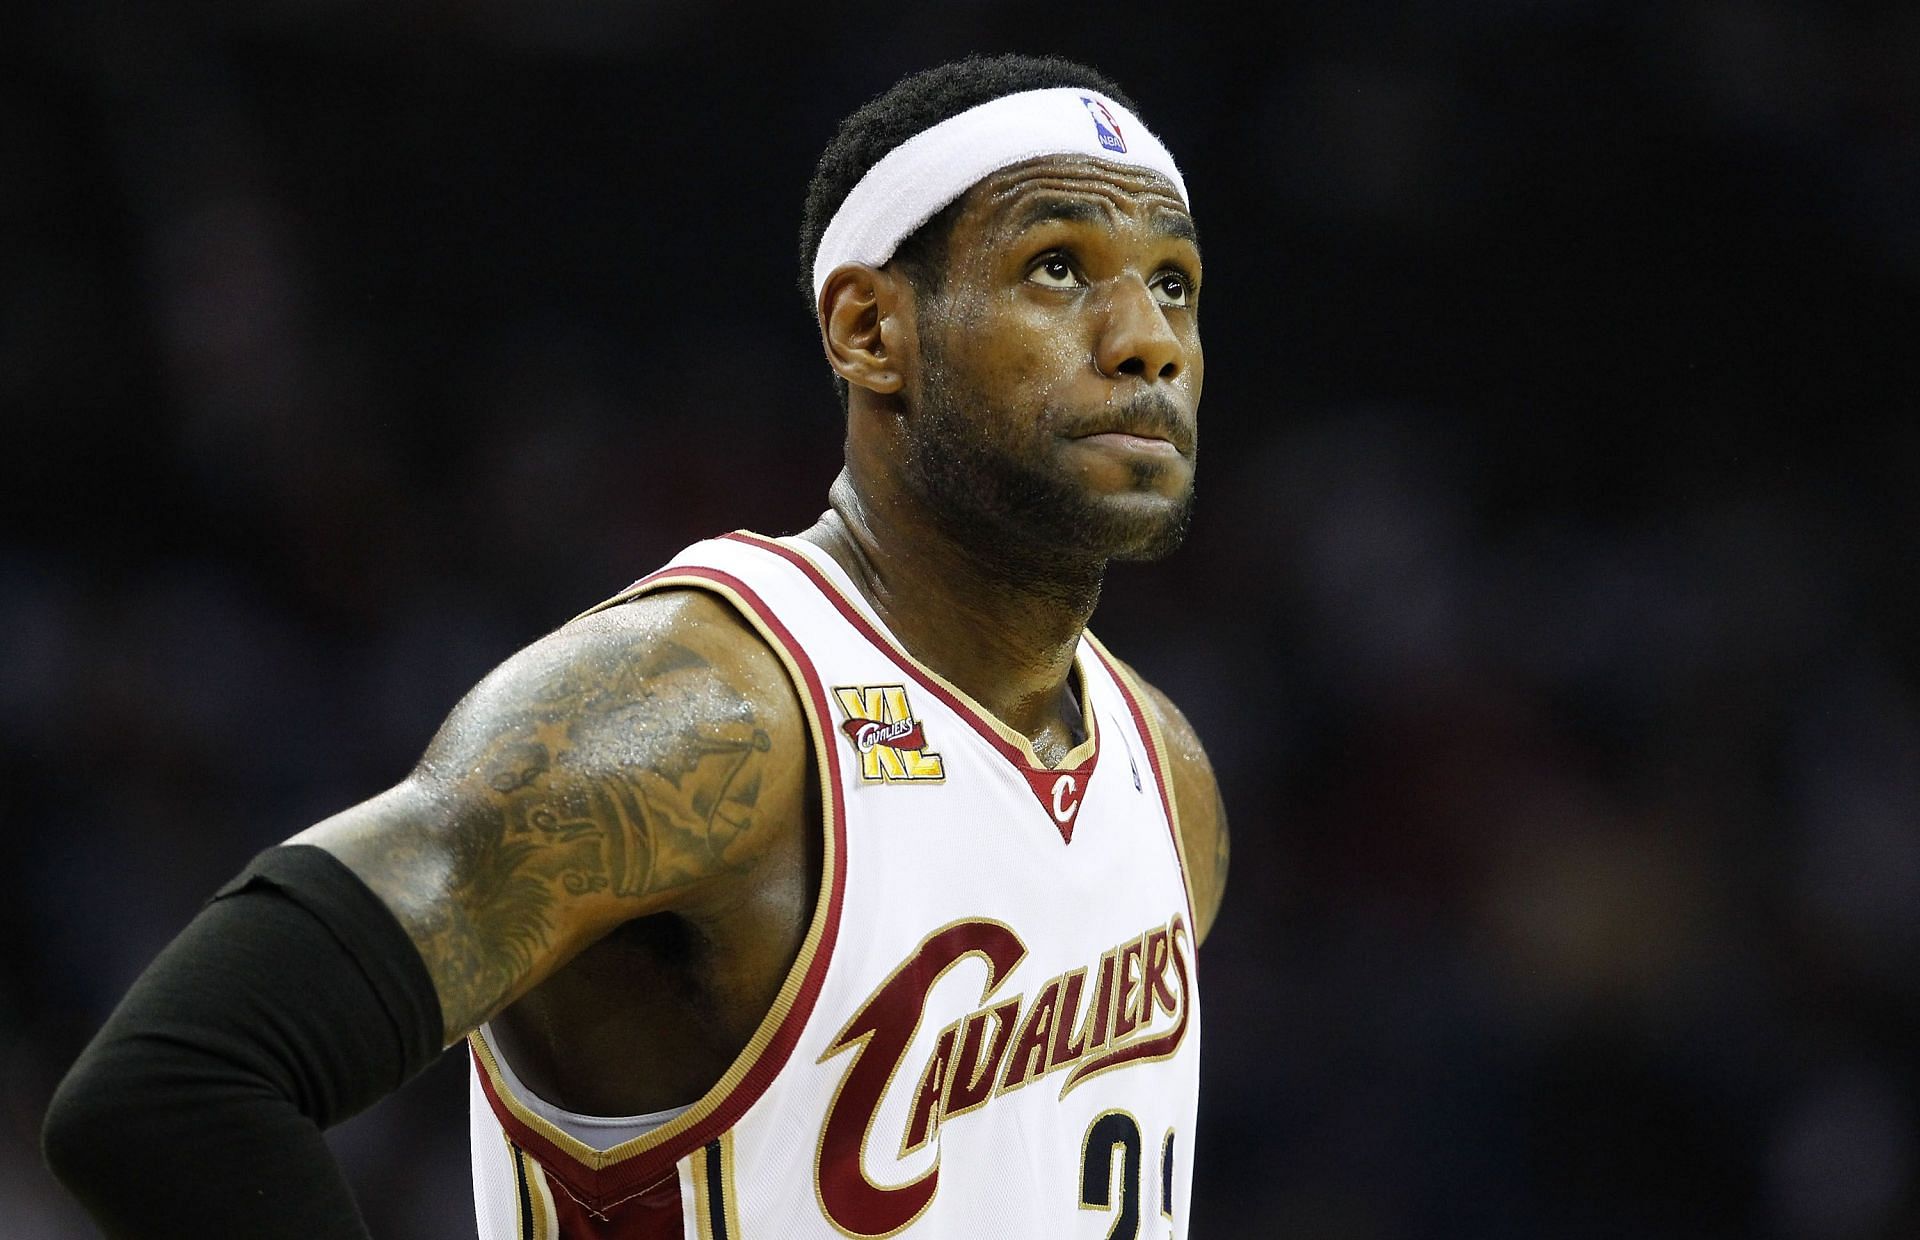 LeBron James spent the first seven years of his career with the Cleveland Cavaliers.